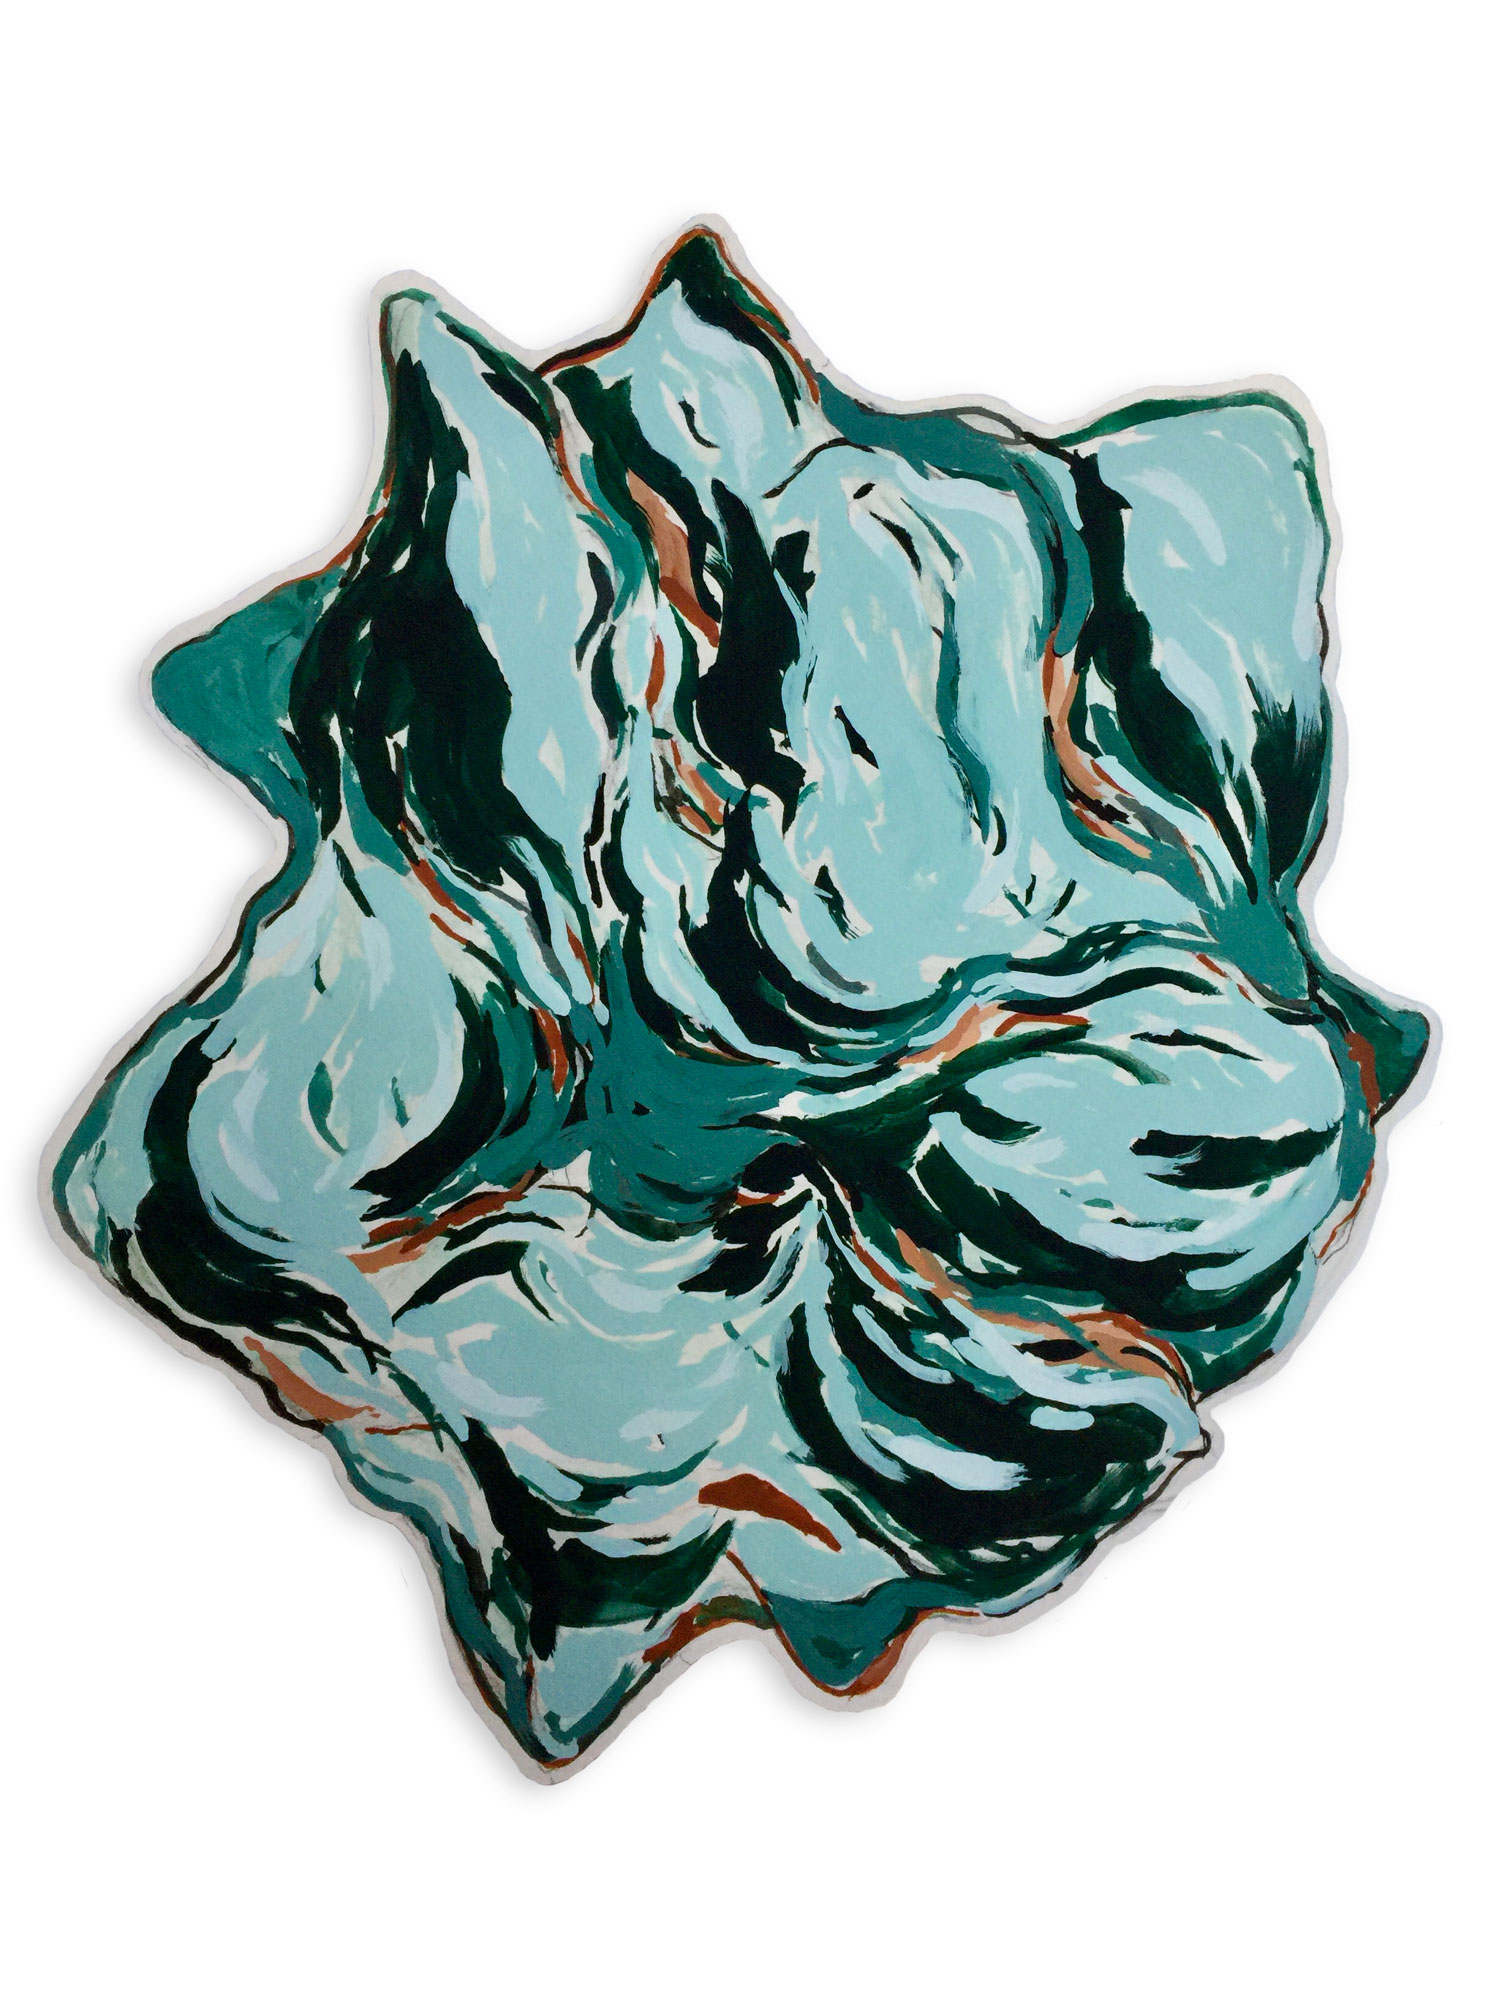 Untitled (Turquoise Conch)